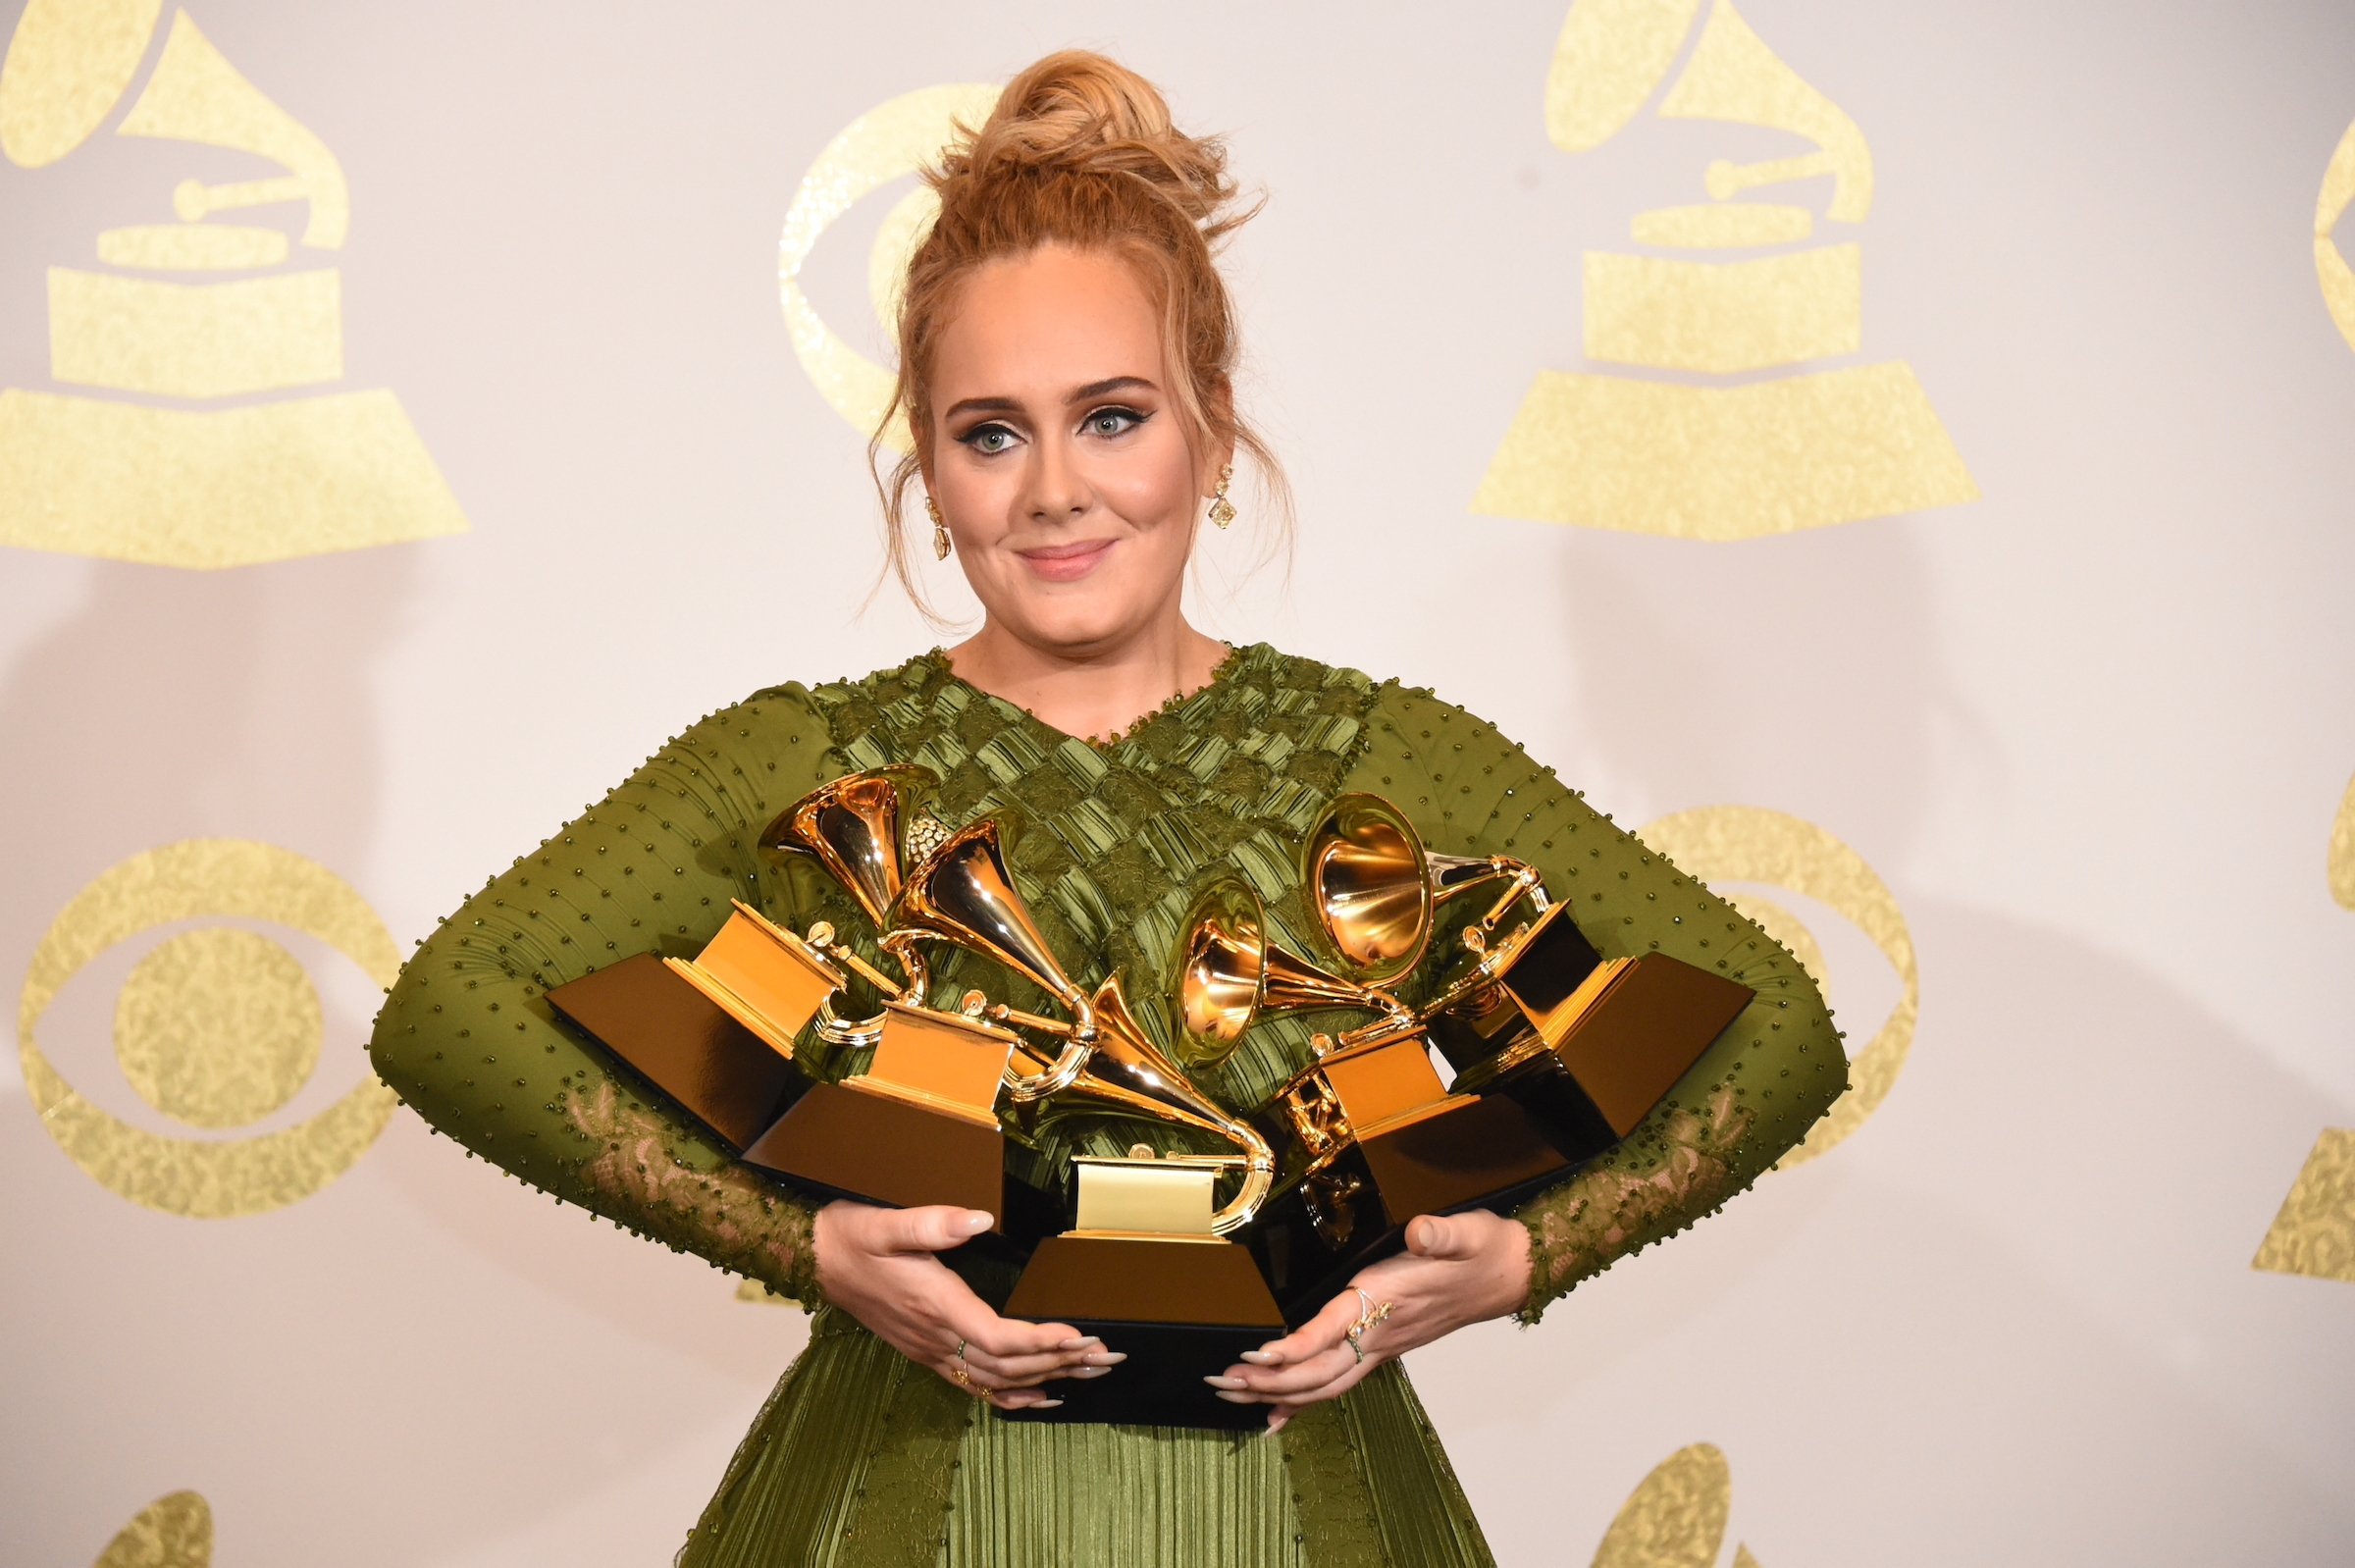 Adele poses for photographs backstage at the Grammy Awards